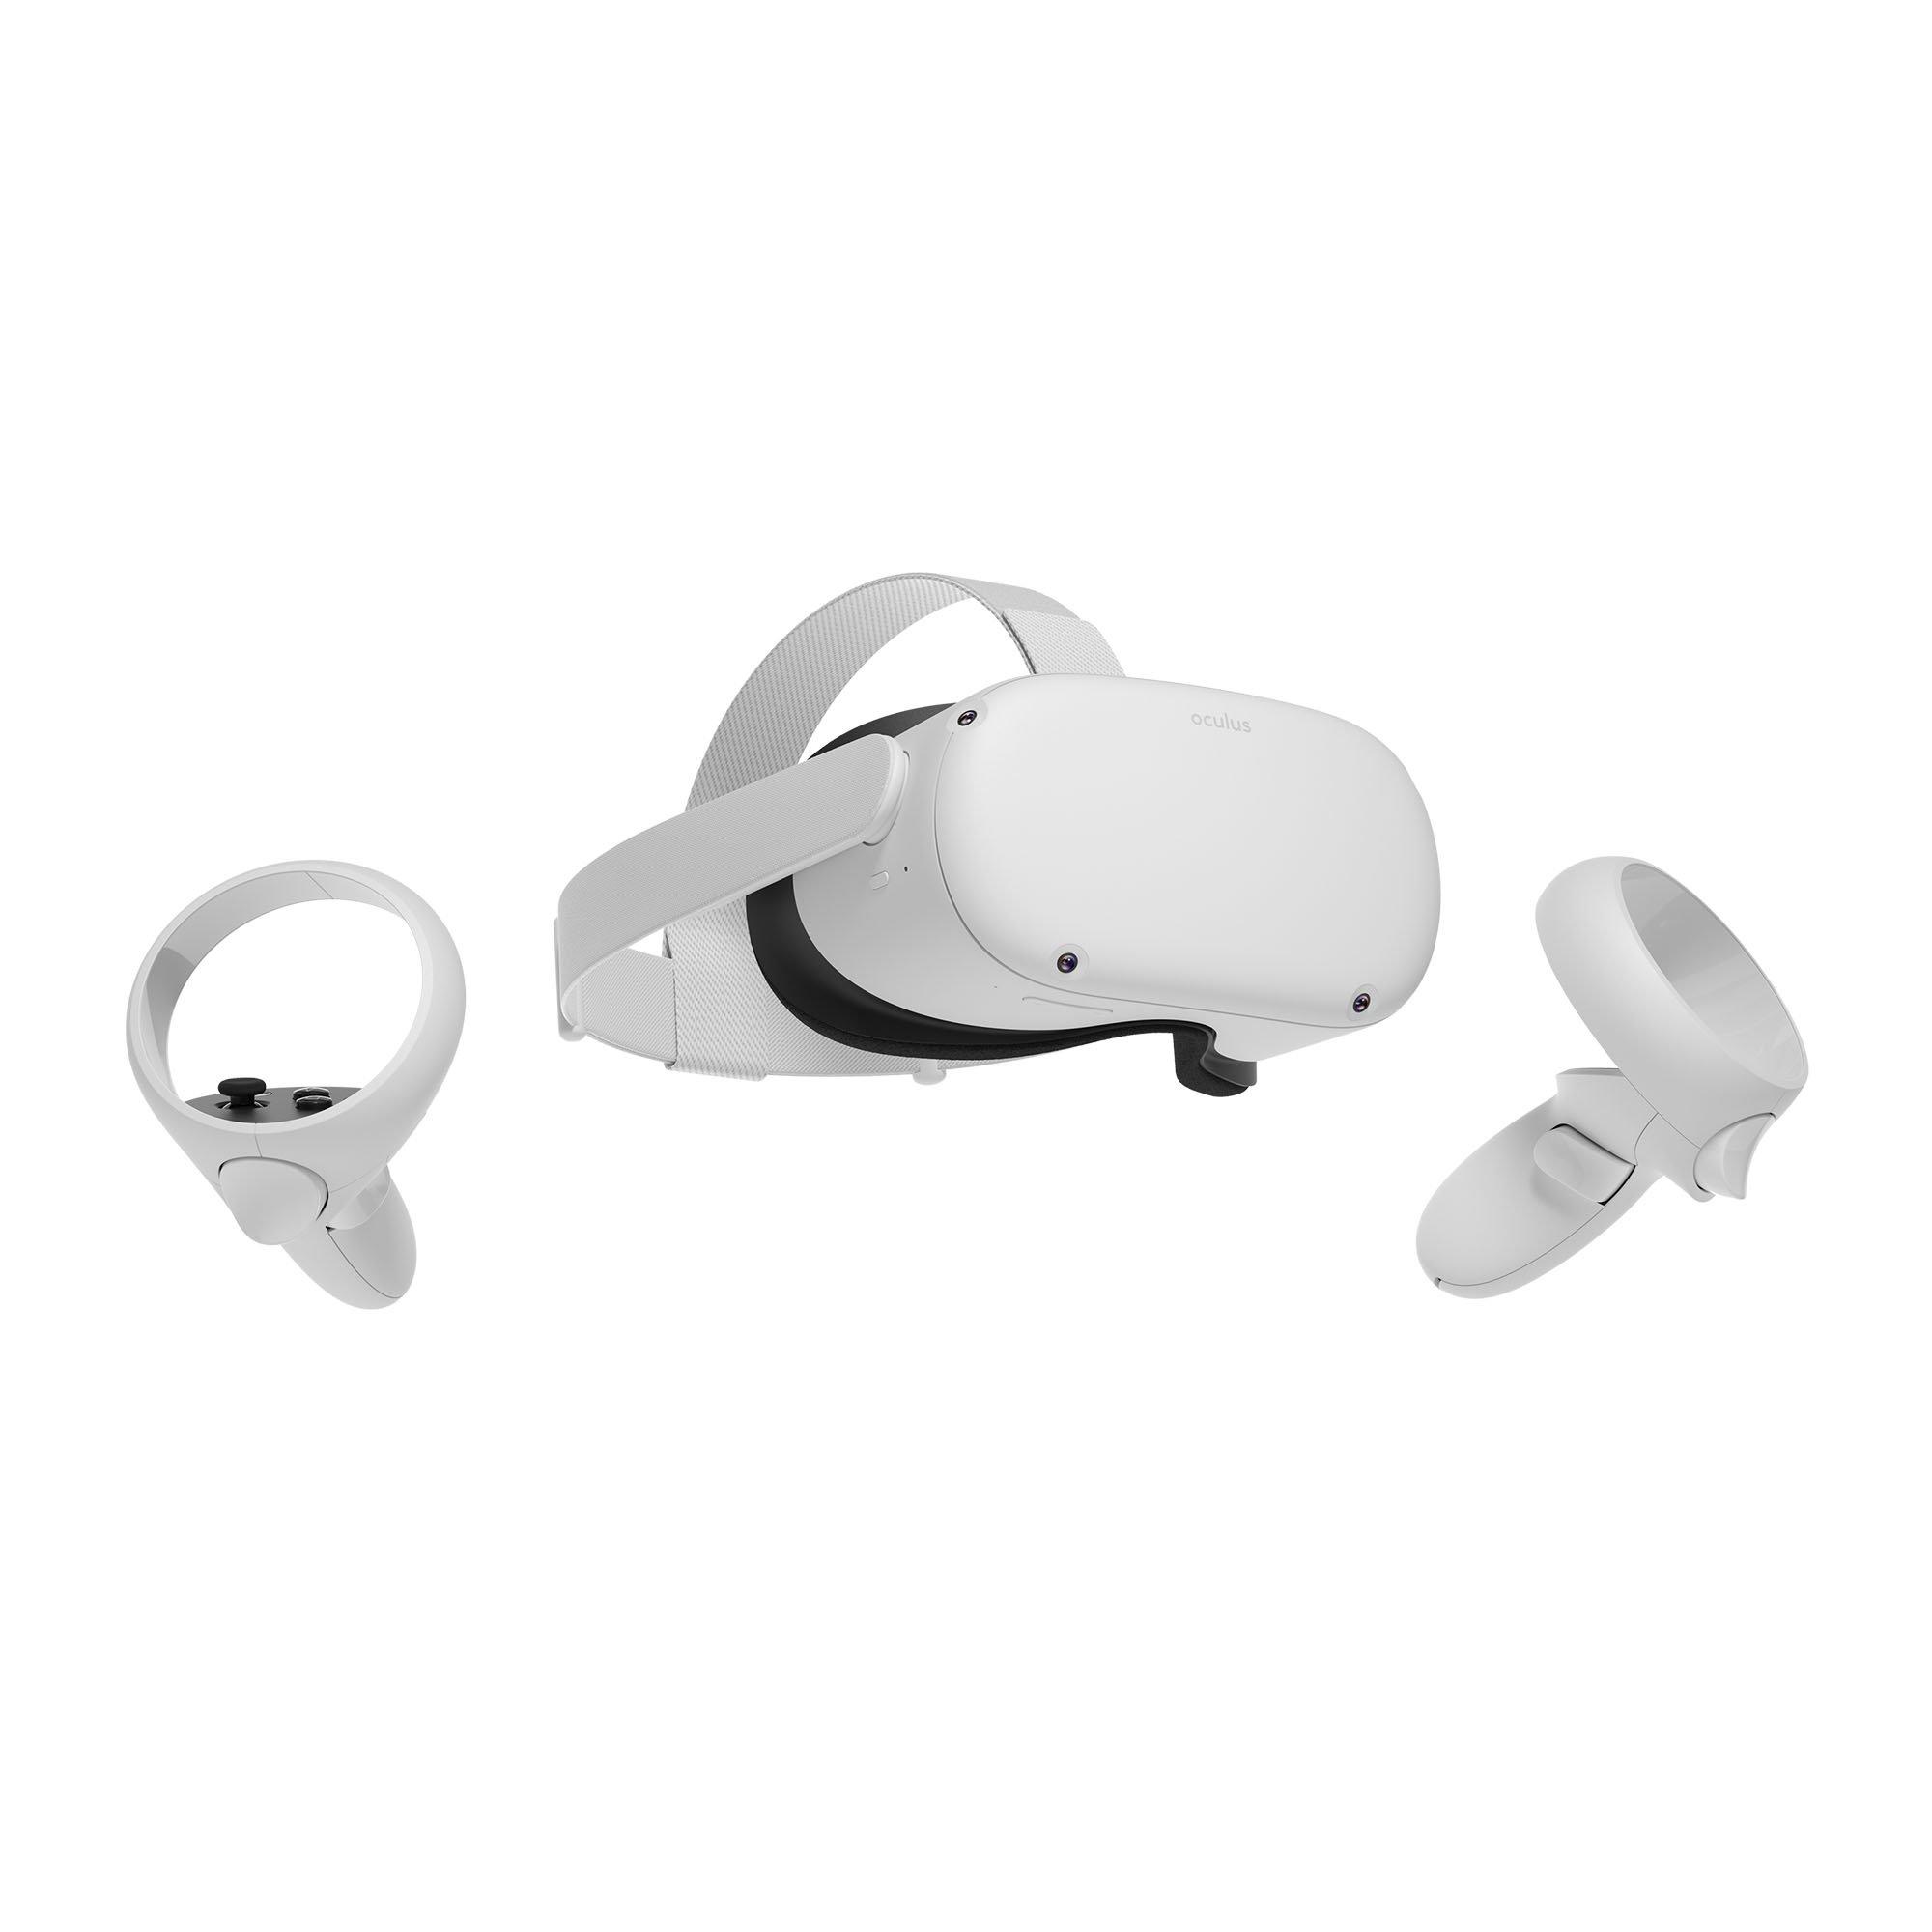 Meta Quest 2 - All-In-One Virtual Reality Headset - 128GB | GameStop